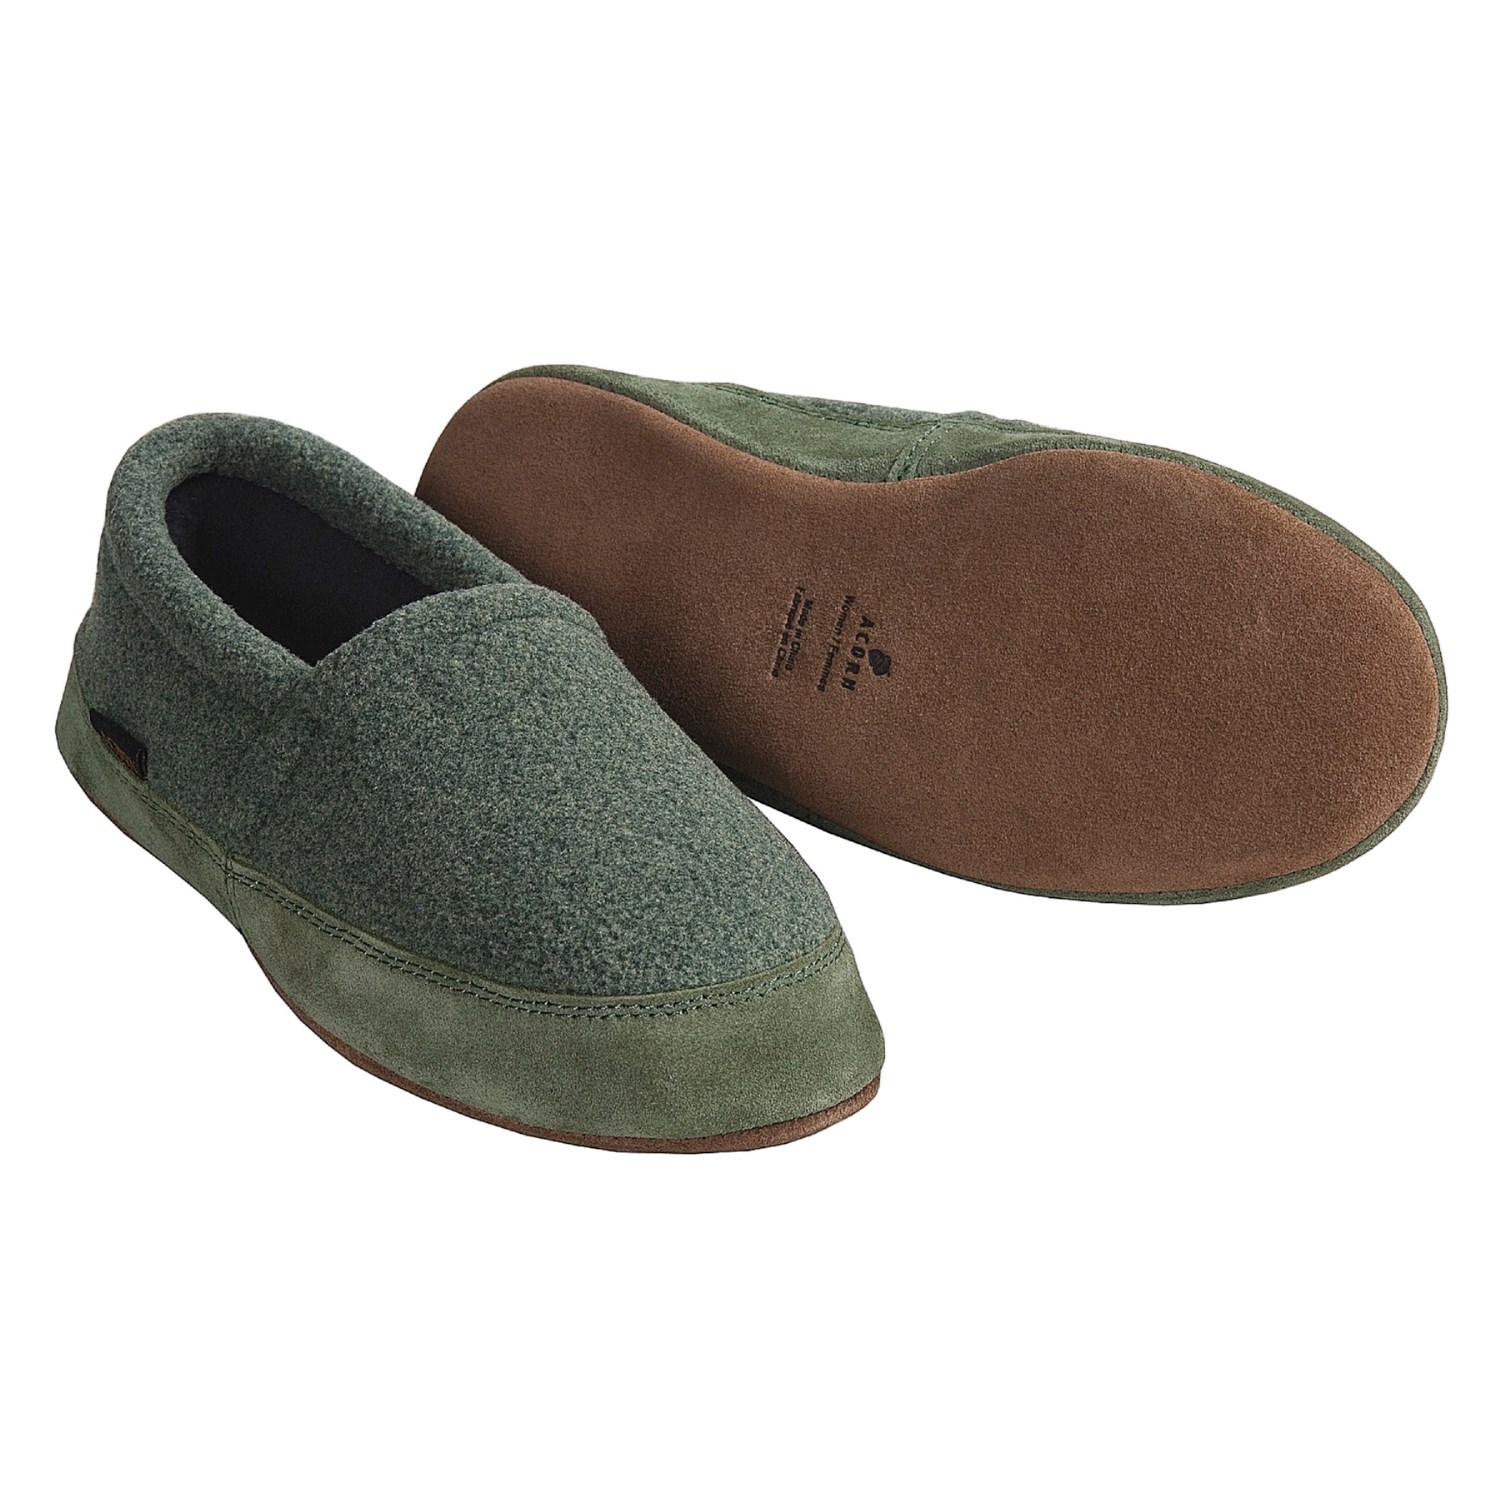 Acorn Lounger Slippers (For Women) 1185R - Save 37%